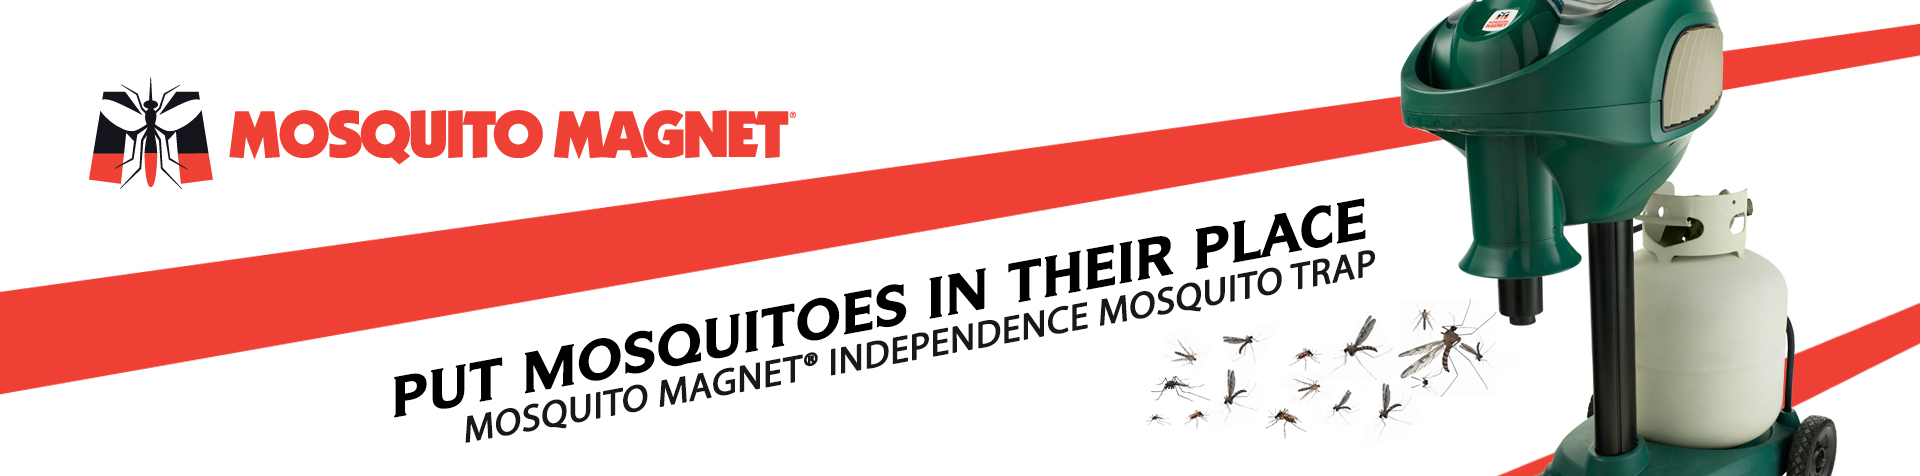 mosquito-magnet-independence_02